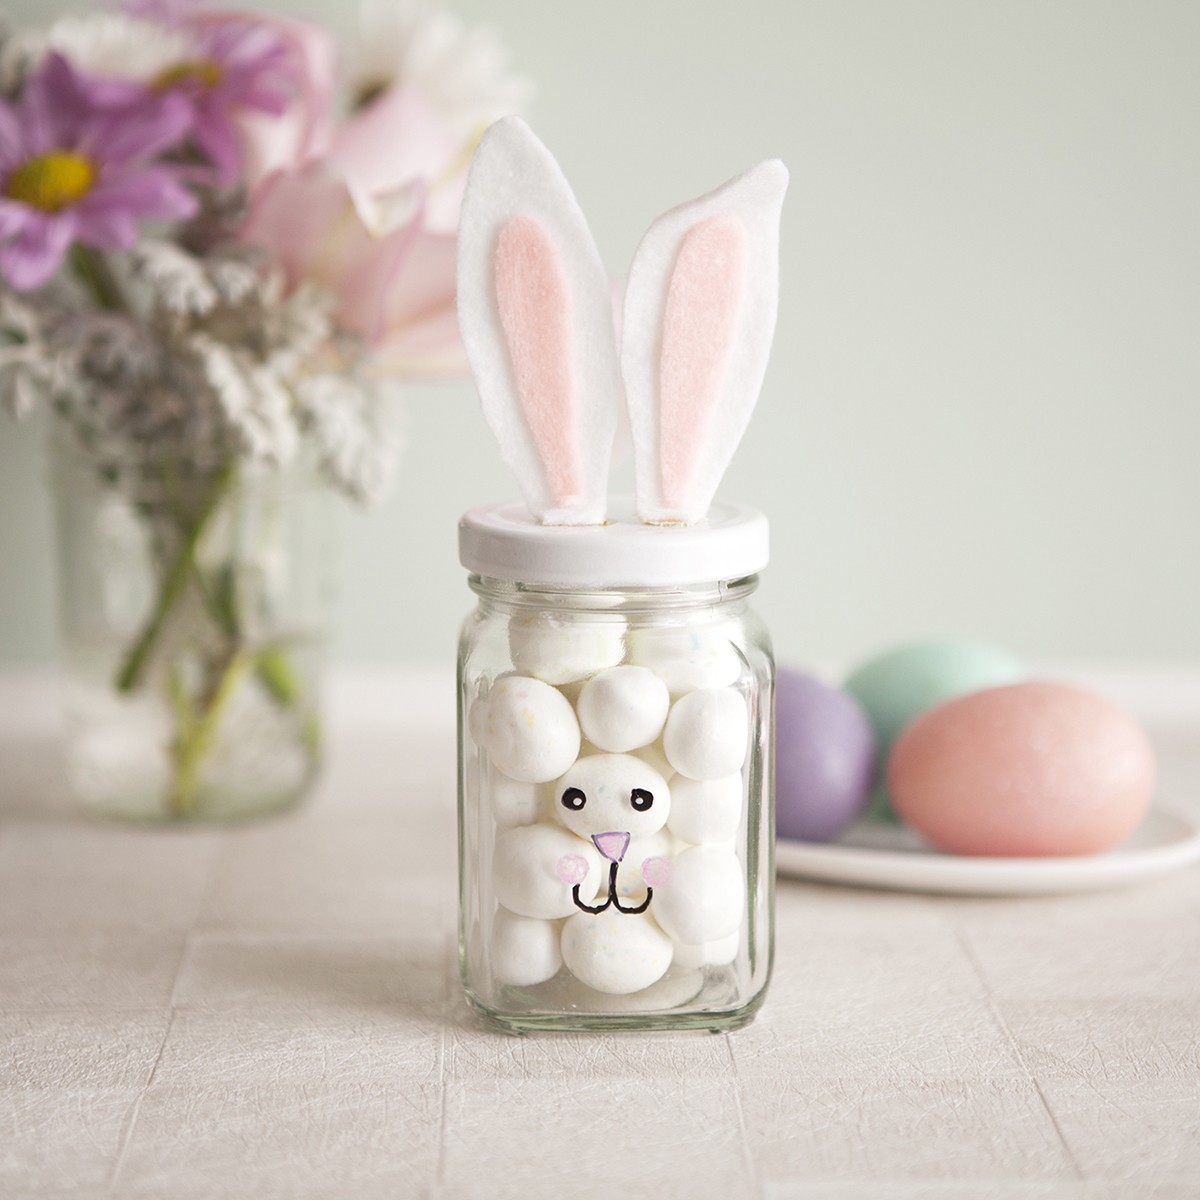 pastel easter bunny jars diy easter crafts for kids holiday gift ideas-f69397